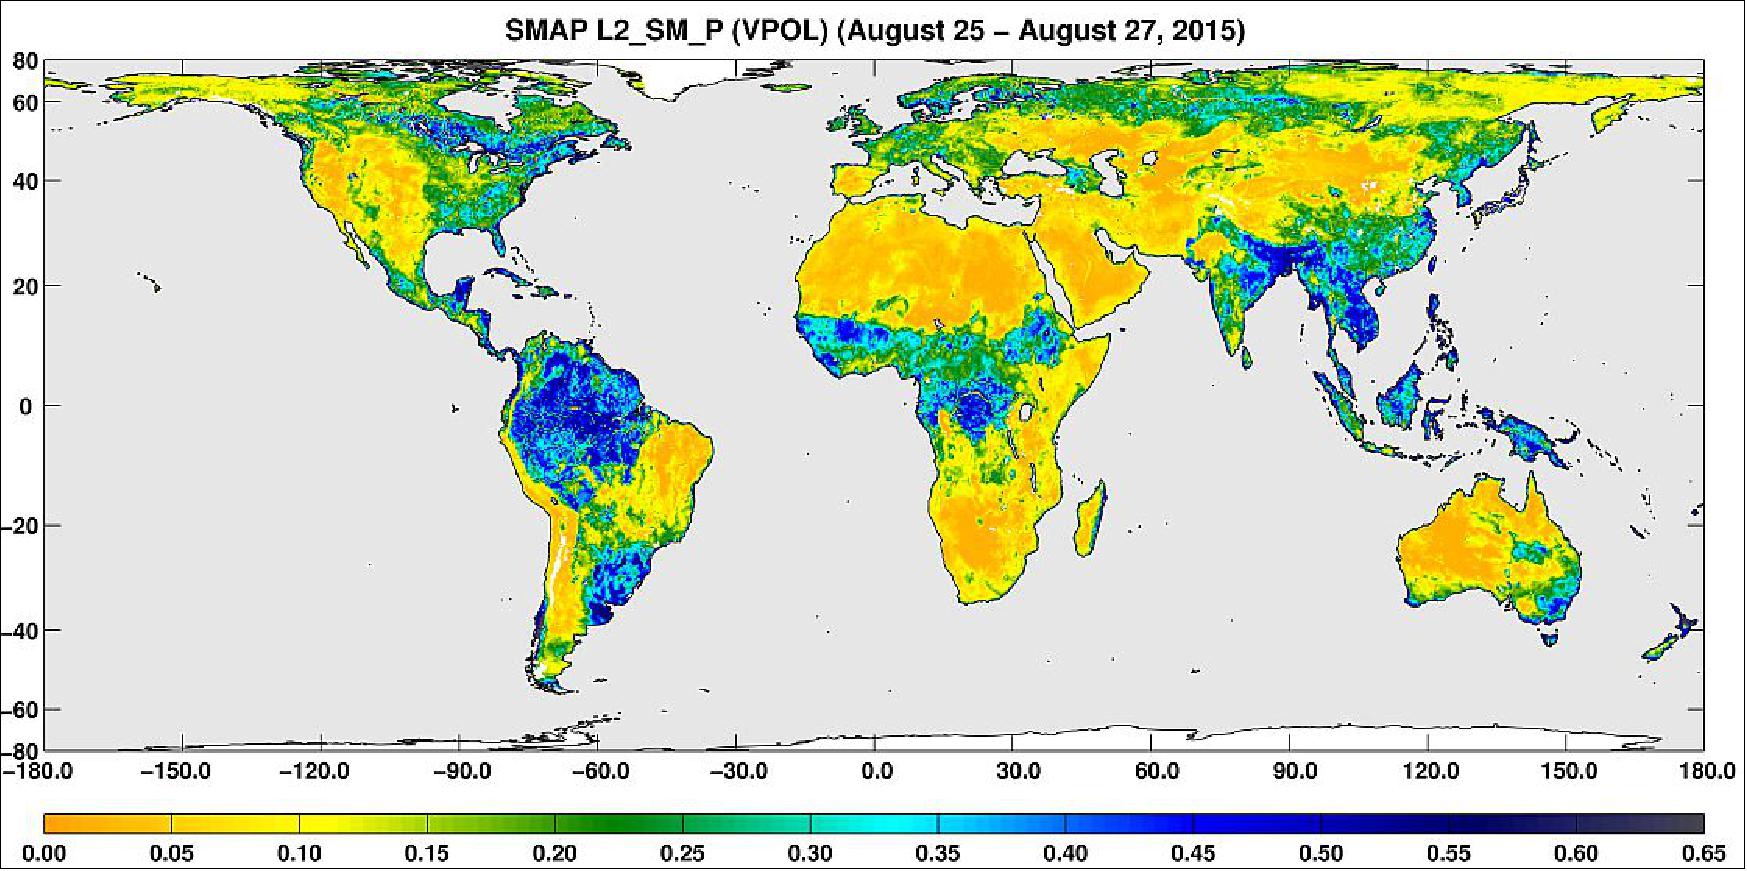 Figure 39: A three-day composite global map of surface soil moisture as retrieved from SMAP's radiometer instrument between Aug. 25-27, 2015 (image credit: NASA) 57)